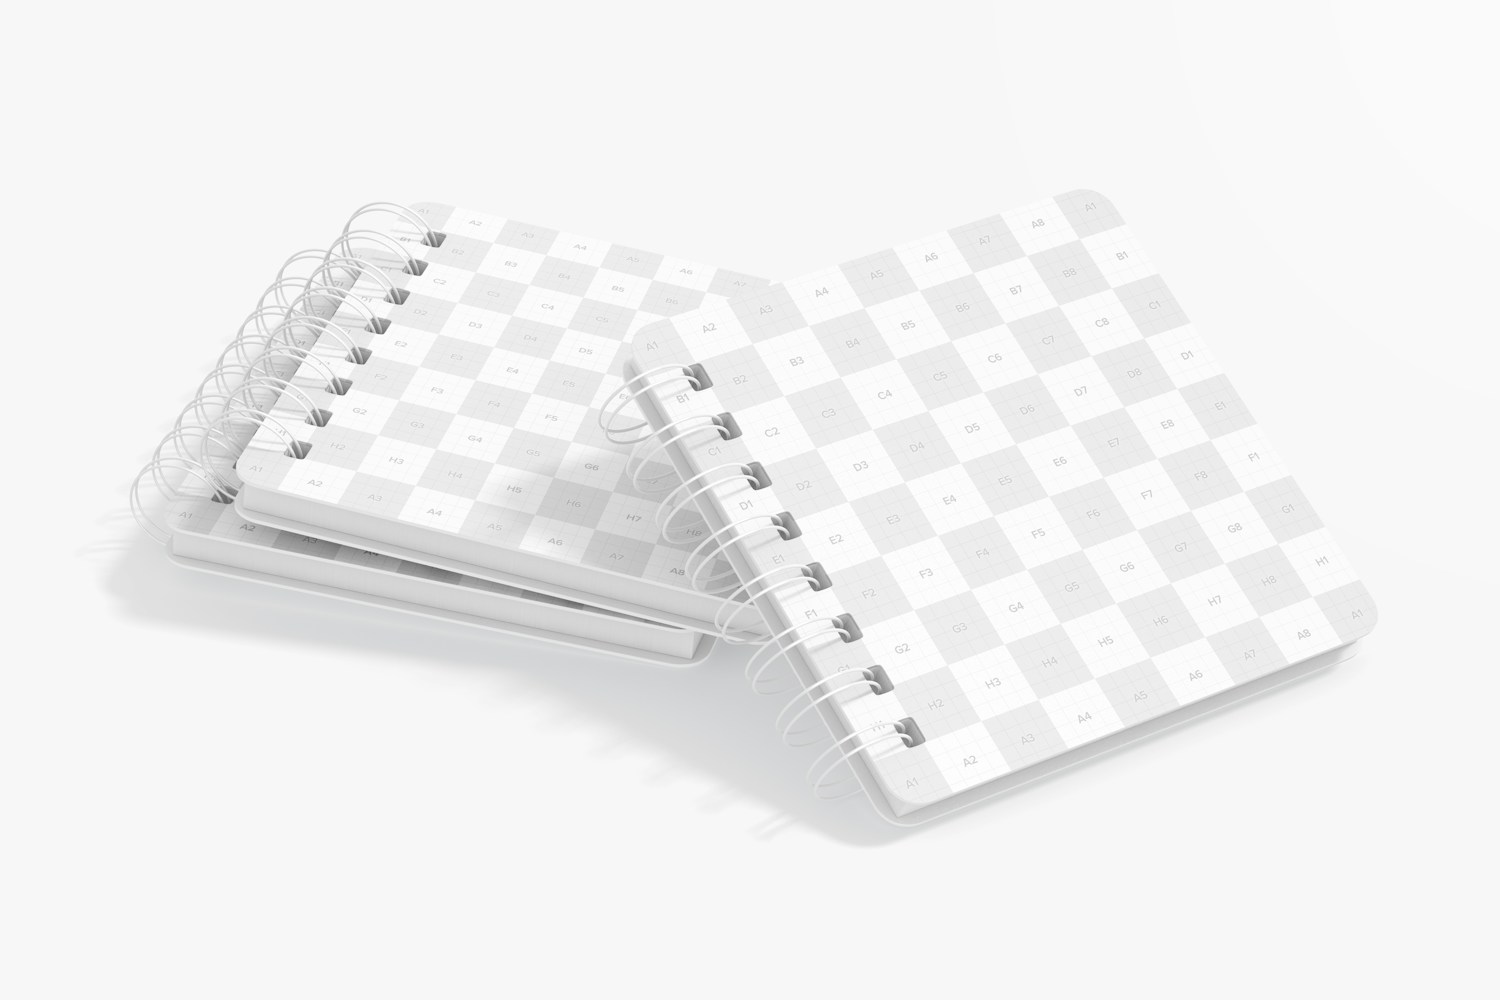 Square Notebooks Mockup, Stacked